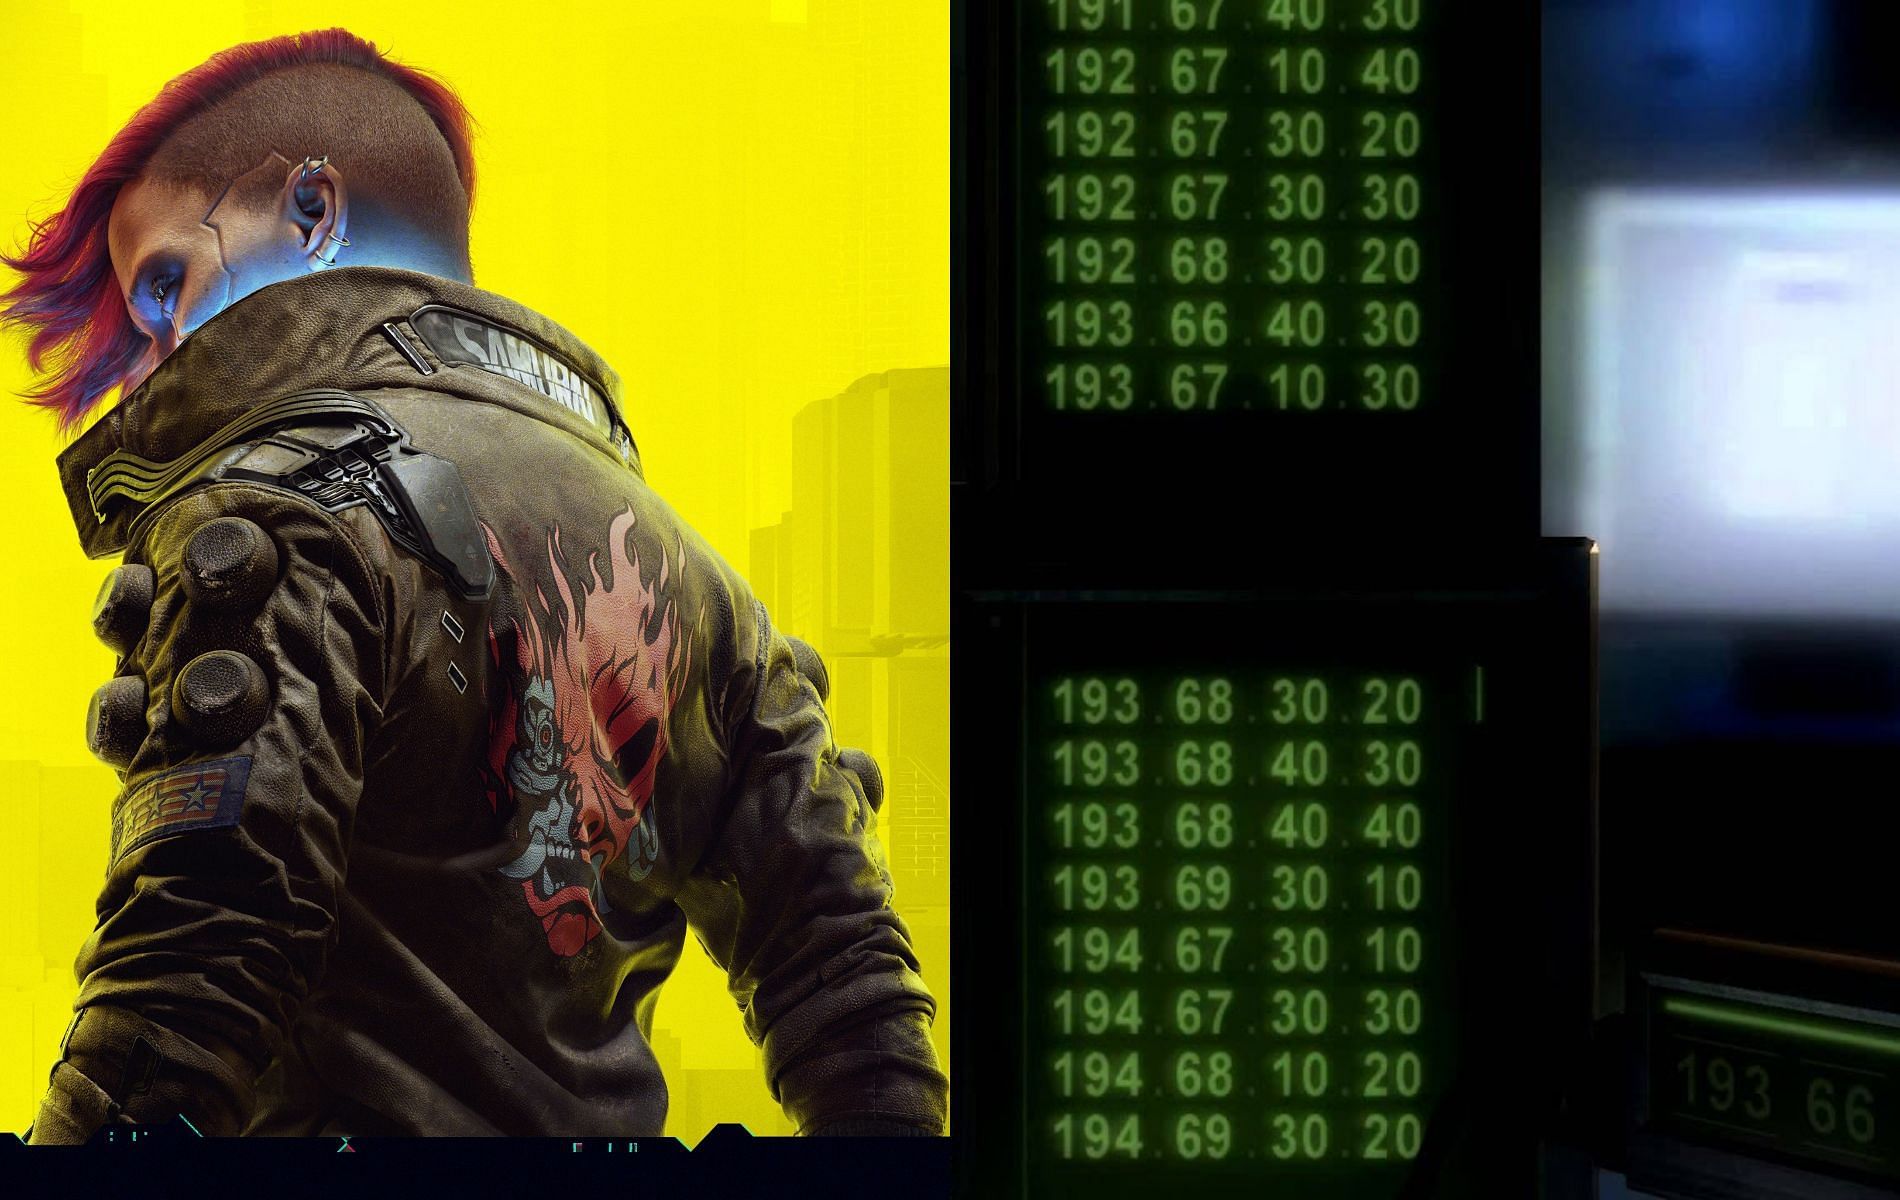 Put on your hacker hat and get to cracking codes (Images via CD Projekt RED/Ubisoft)